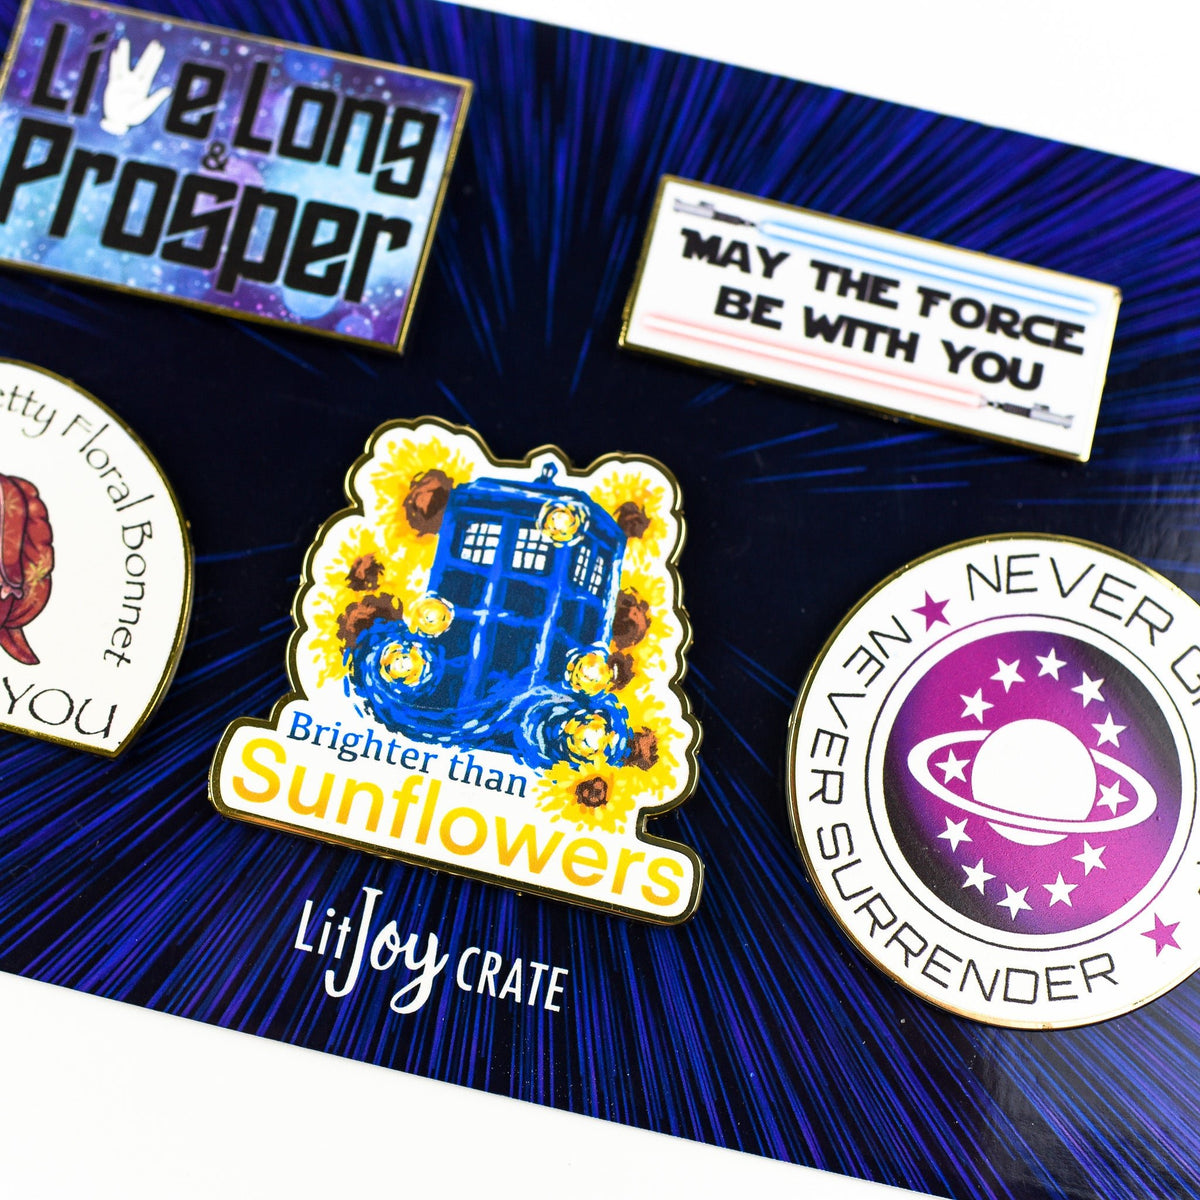 5 Sci Fi Enamel Magnets wthat say: Live Long and Prosper, May the force be with you, I swear by my pretty floral bonnet I will end you, Brighter than sunflowers, and Never give up, never surrender.